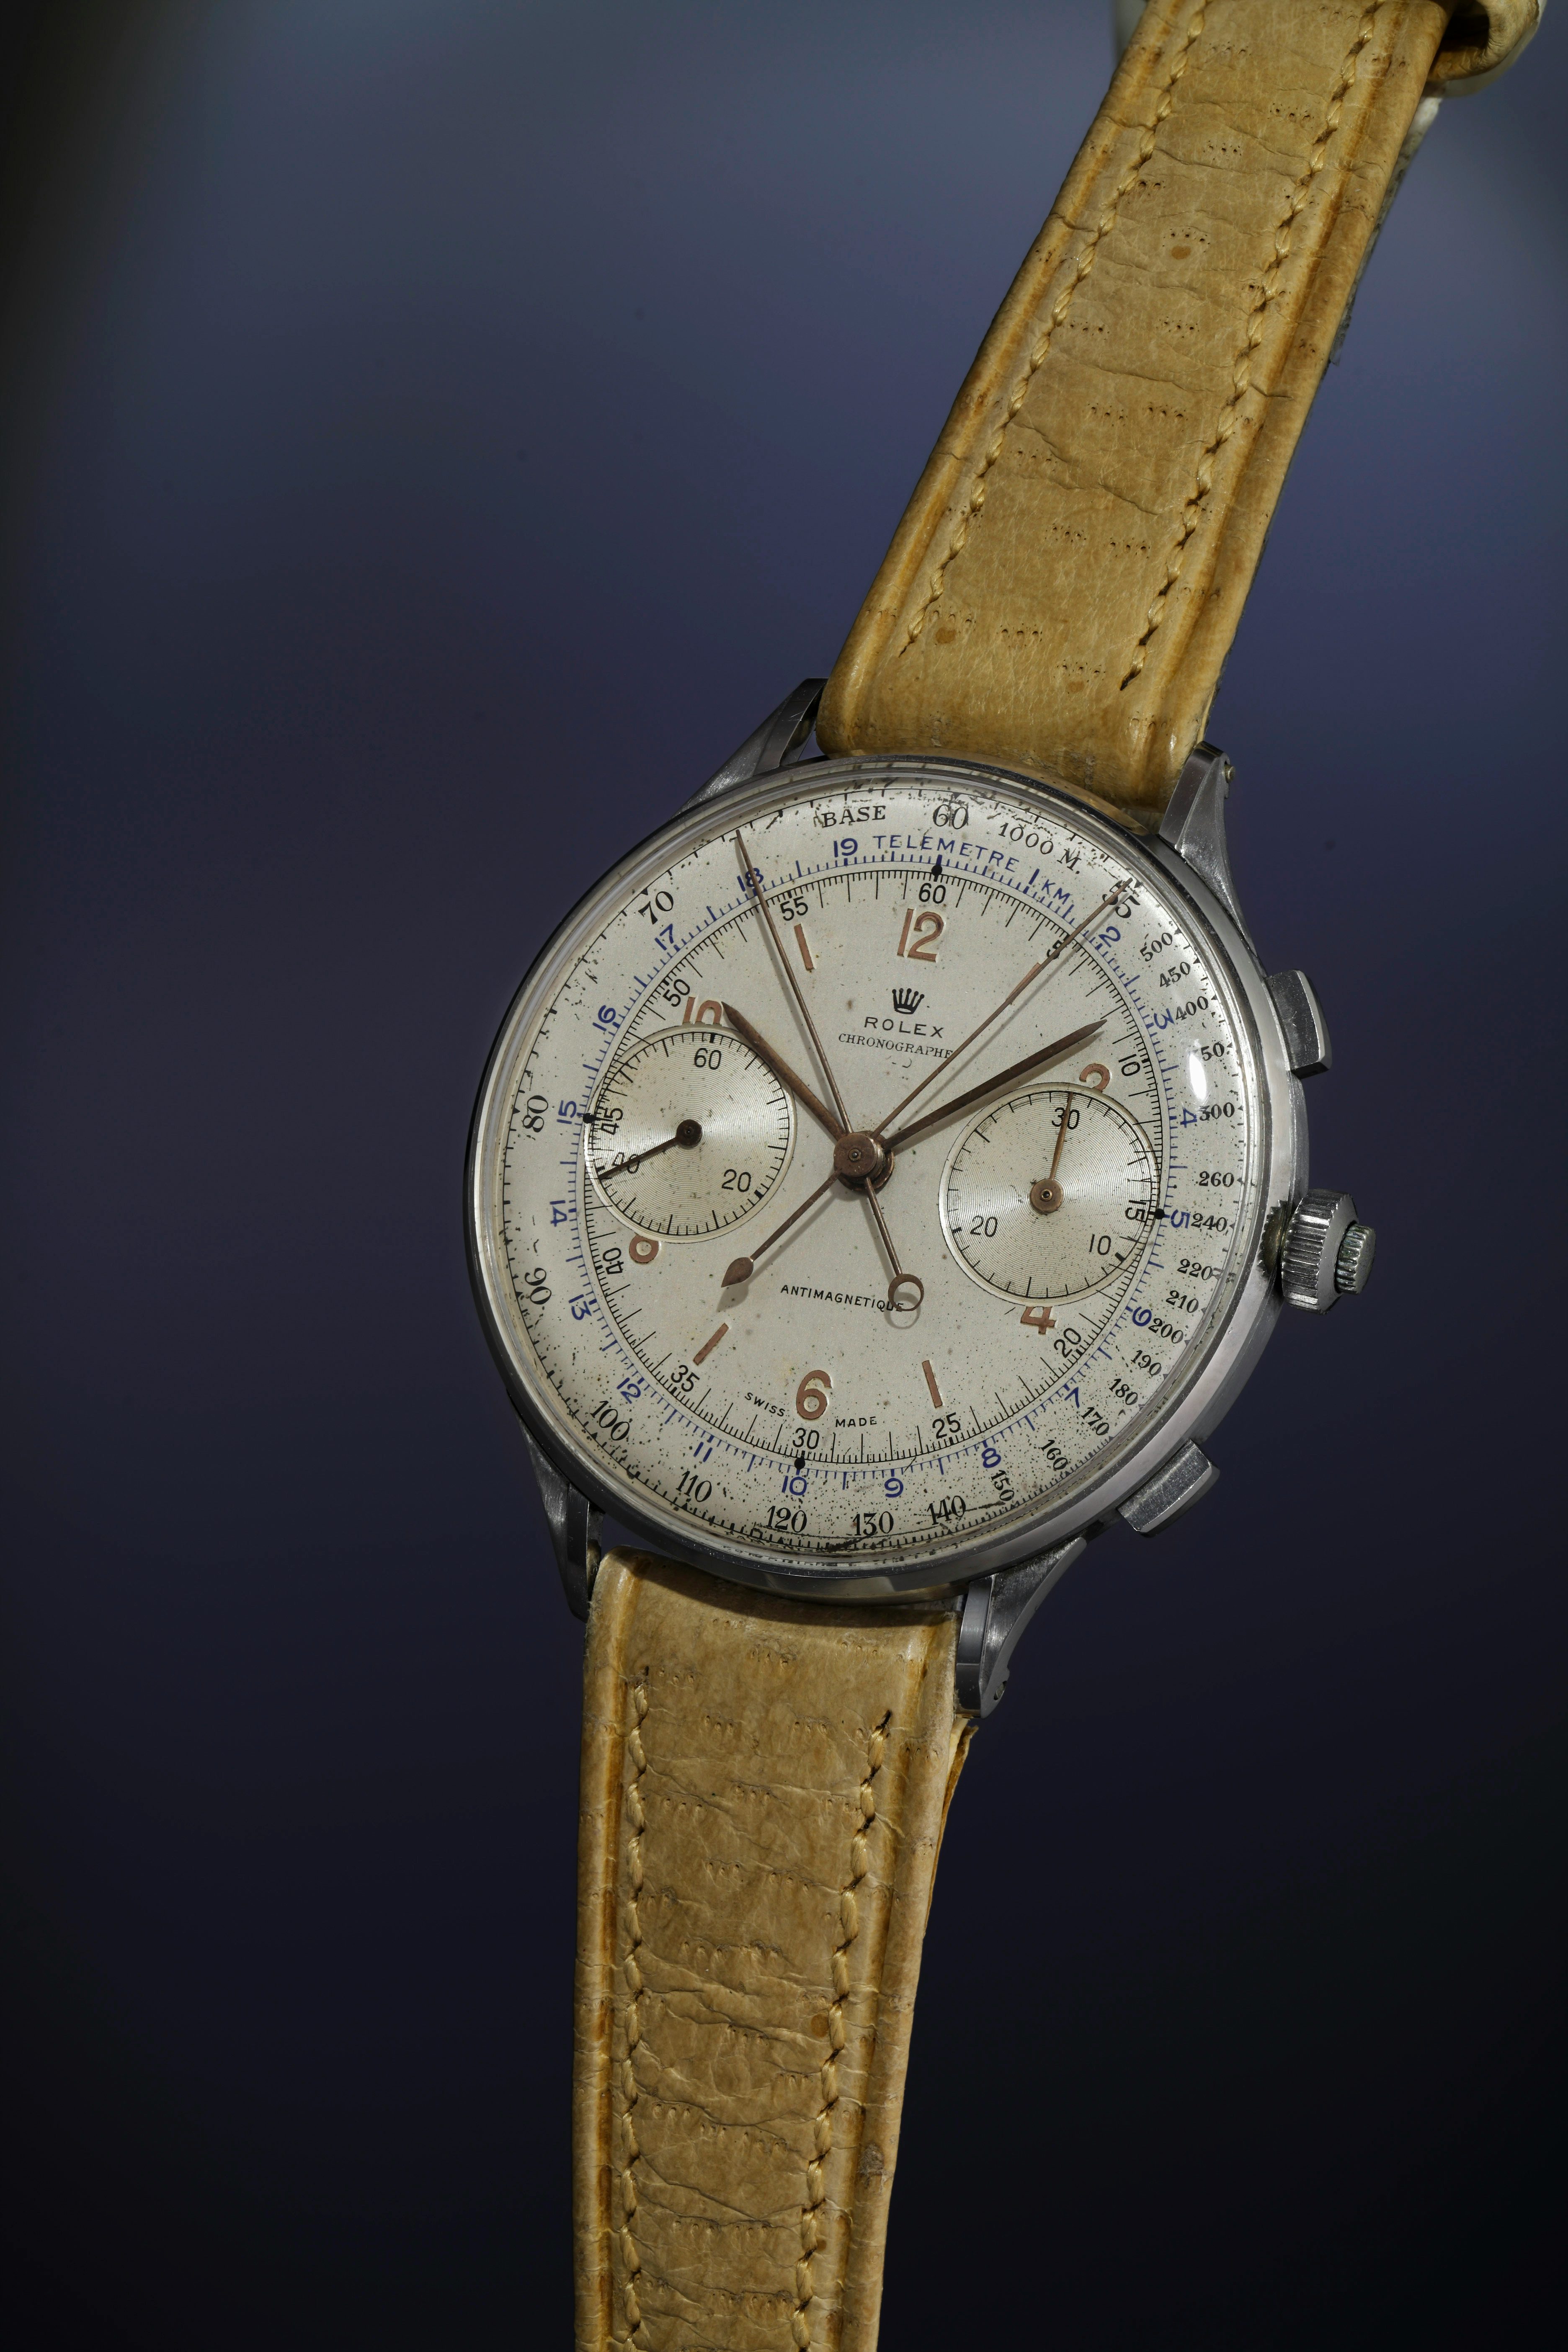 Are old Geneva watches valuable?